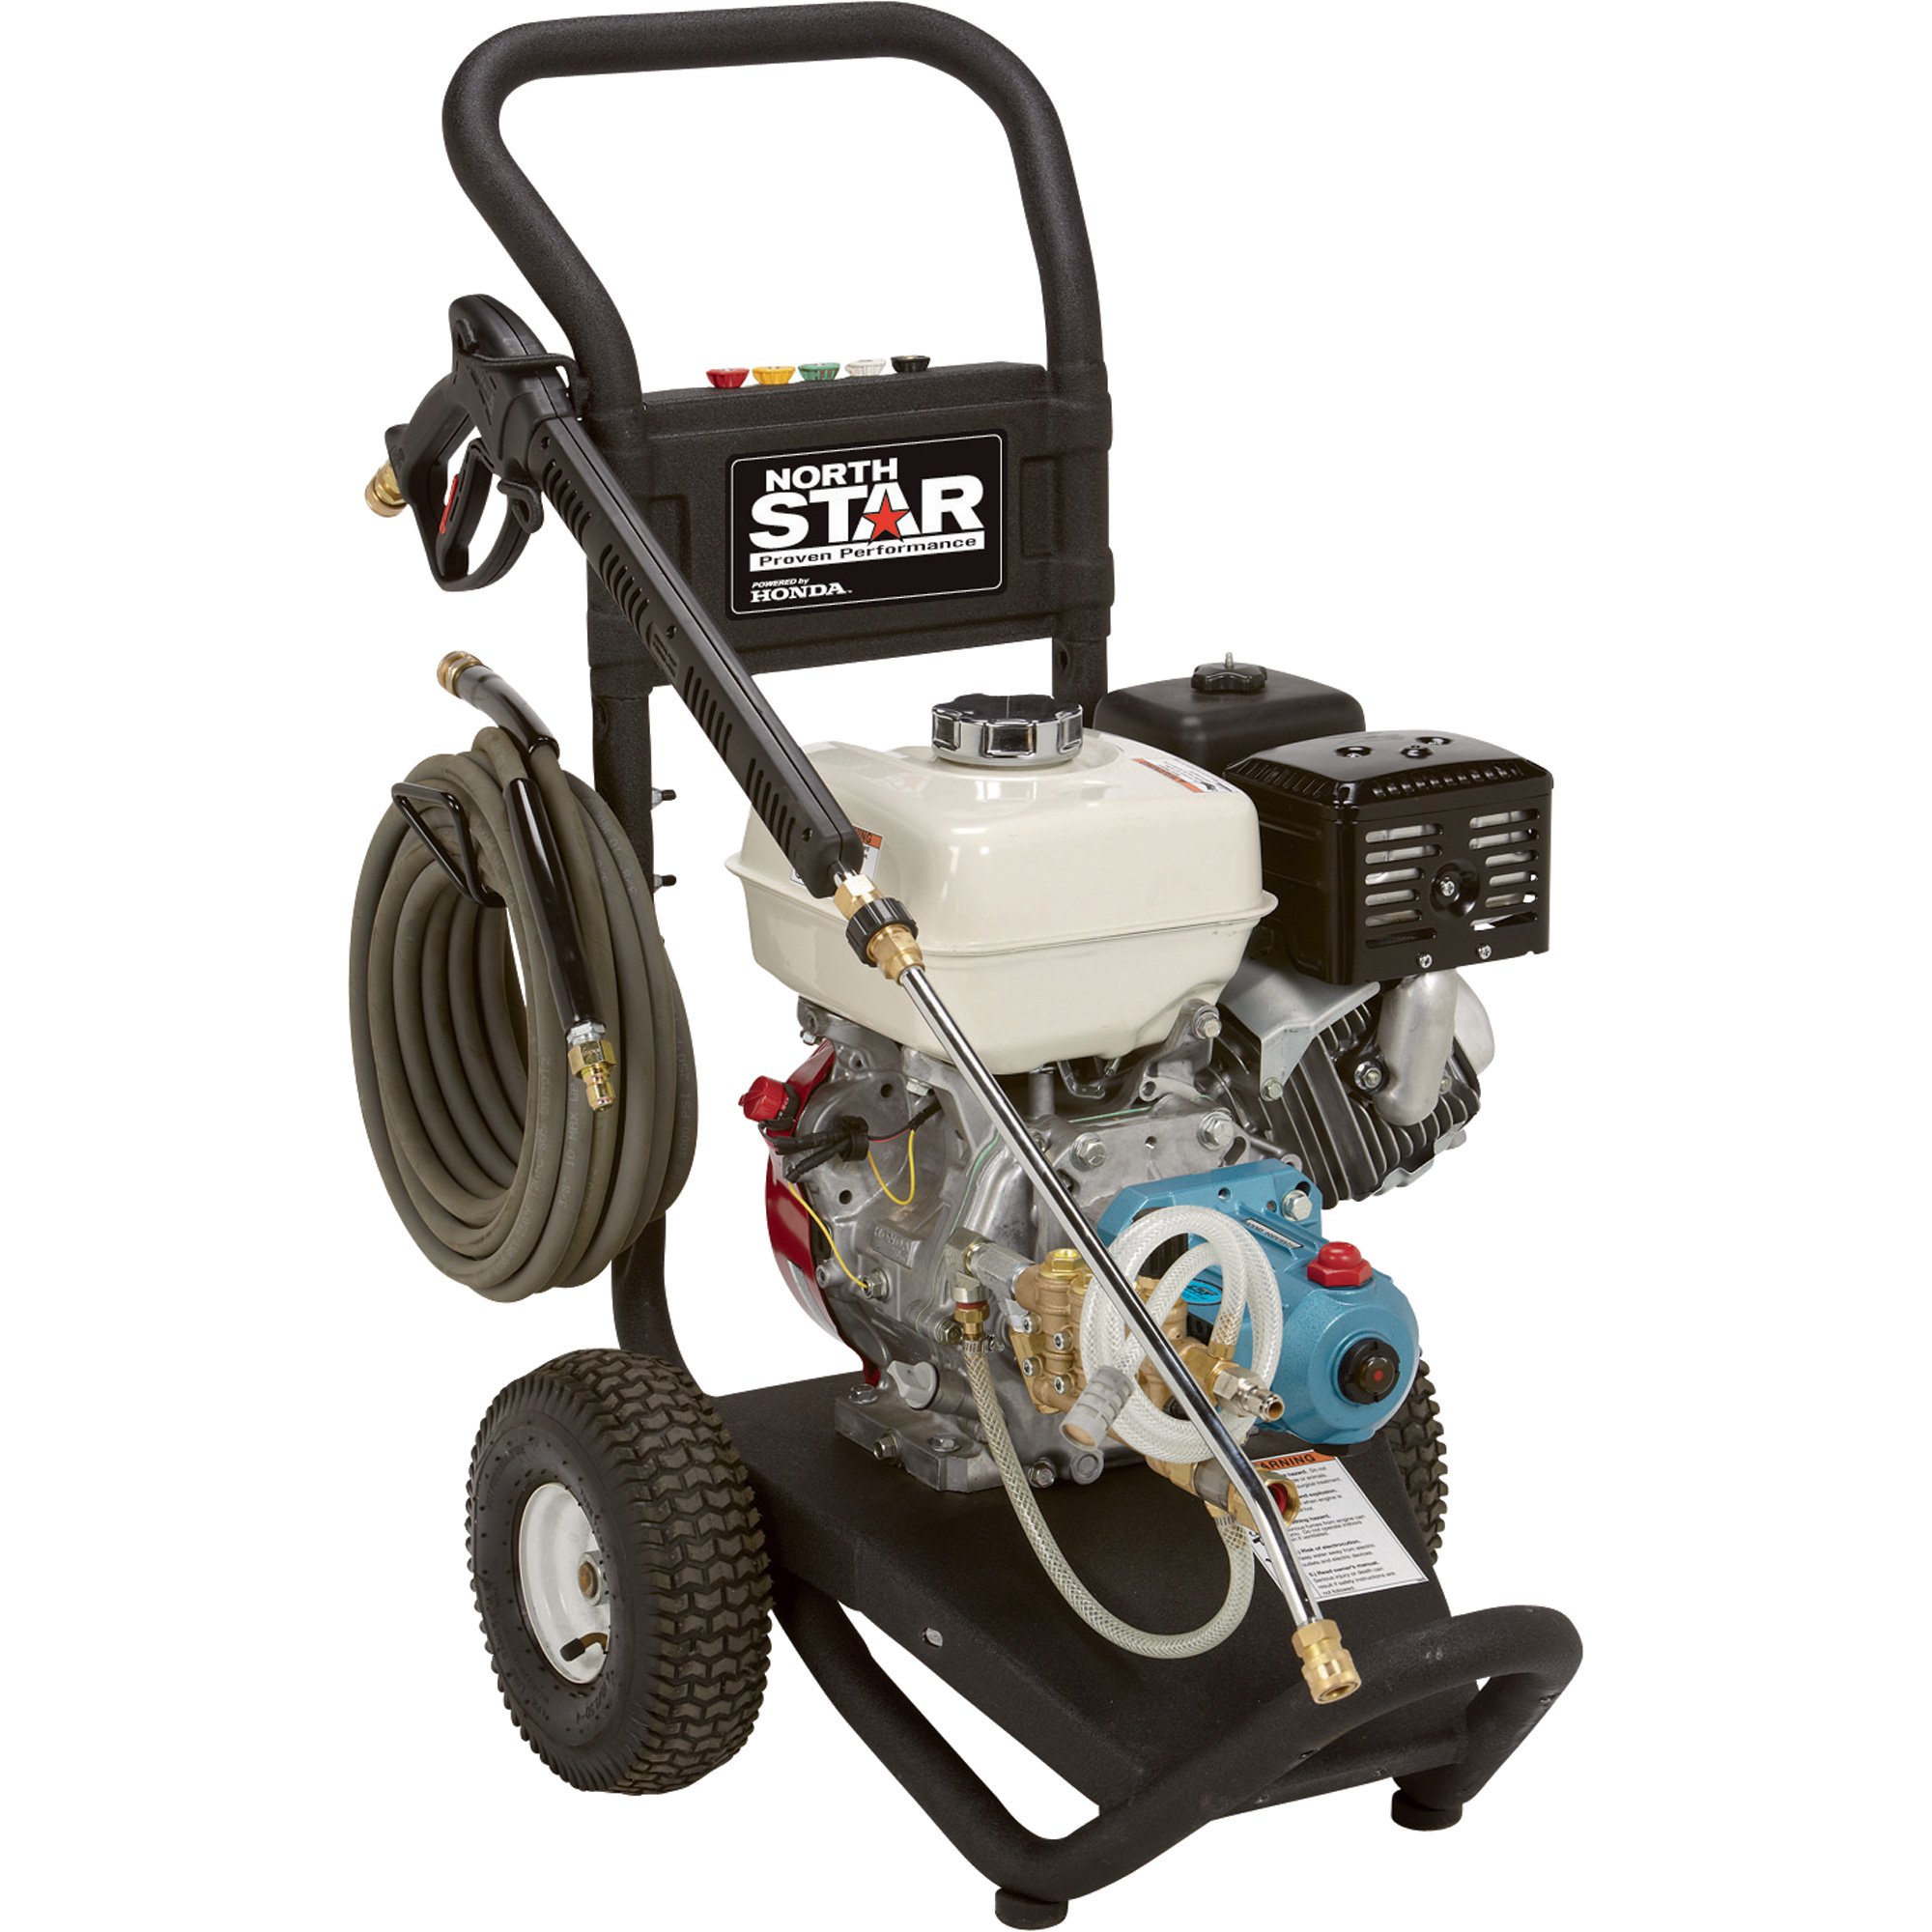 NorthStar 15781820 Gas Cold Water Pressure Washer 3300 PSI 3.0 GPM Honda Engine Freight Included Replaced with 157124